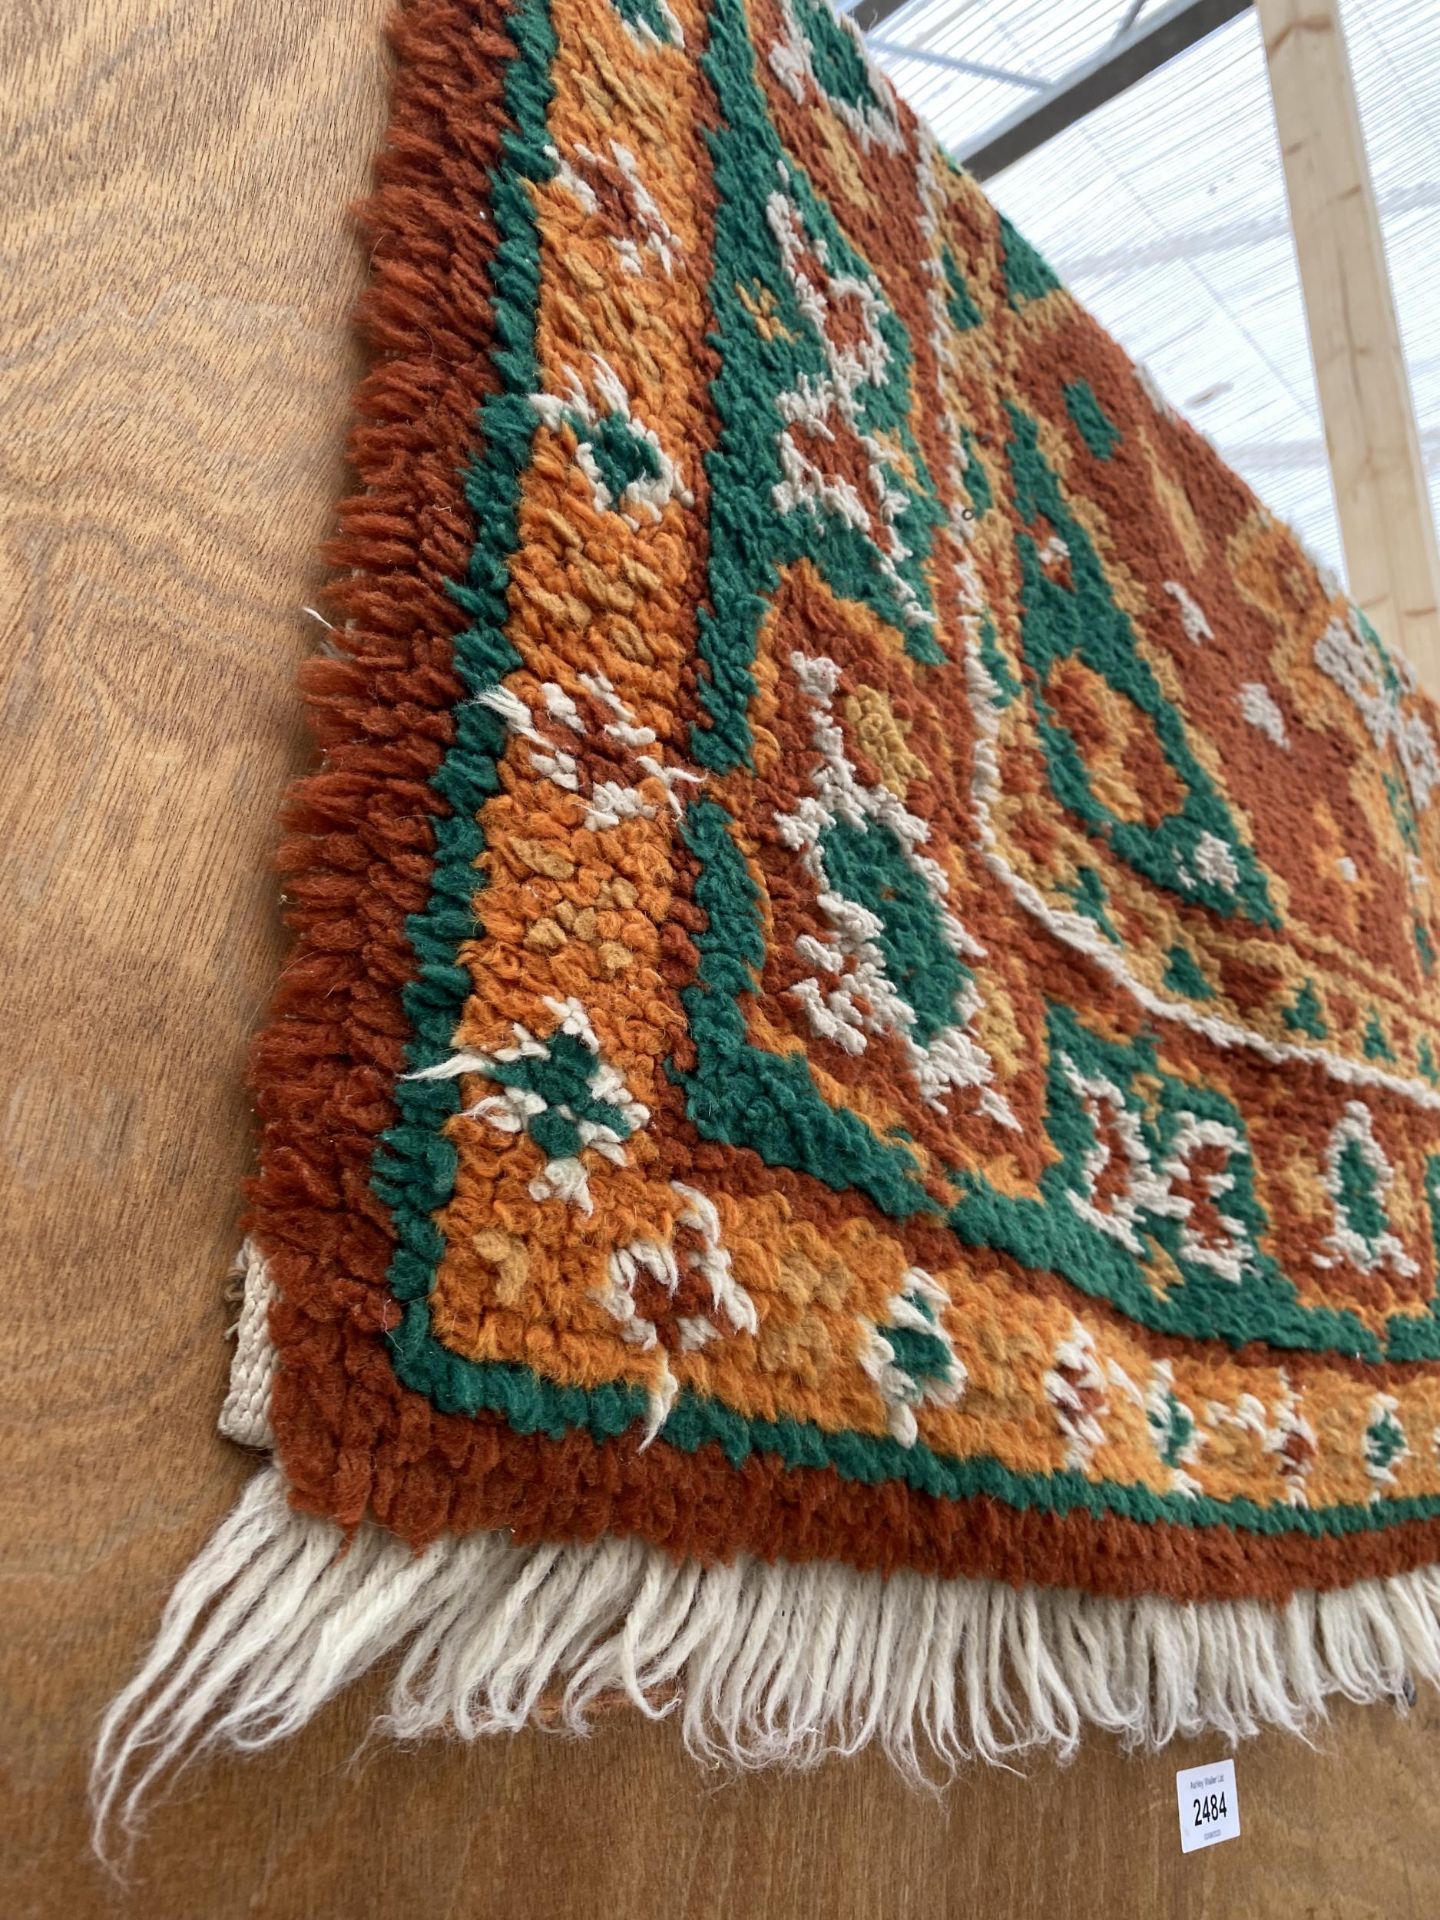 AN ORANGE AND GREEN PATTERNED FRINGED RUG - Image 2 of 2